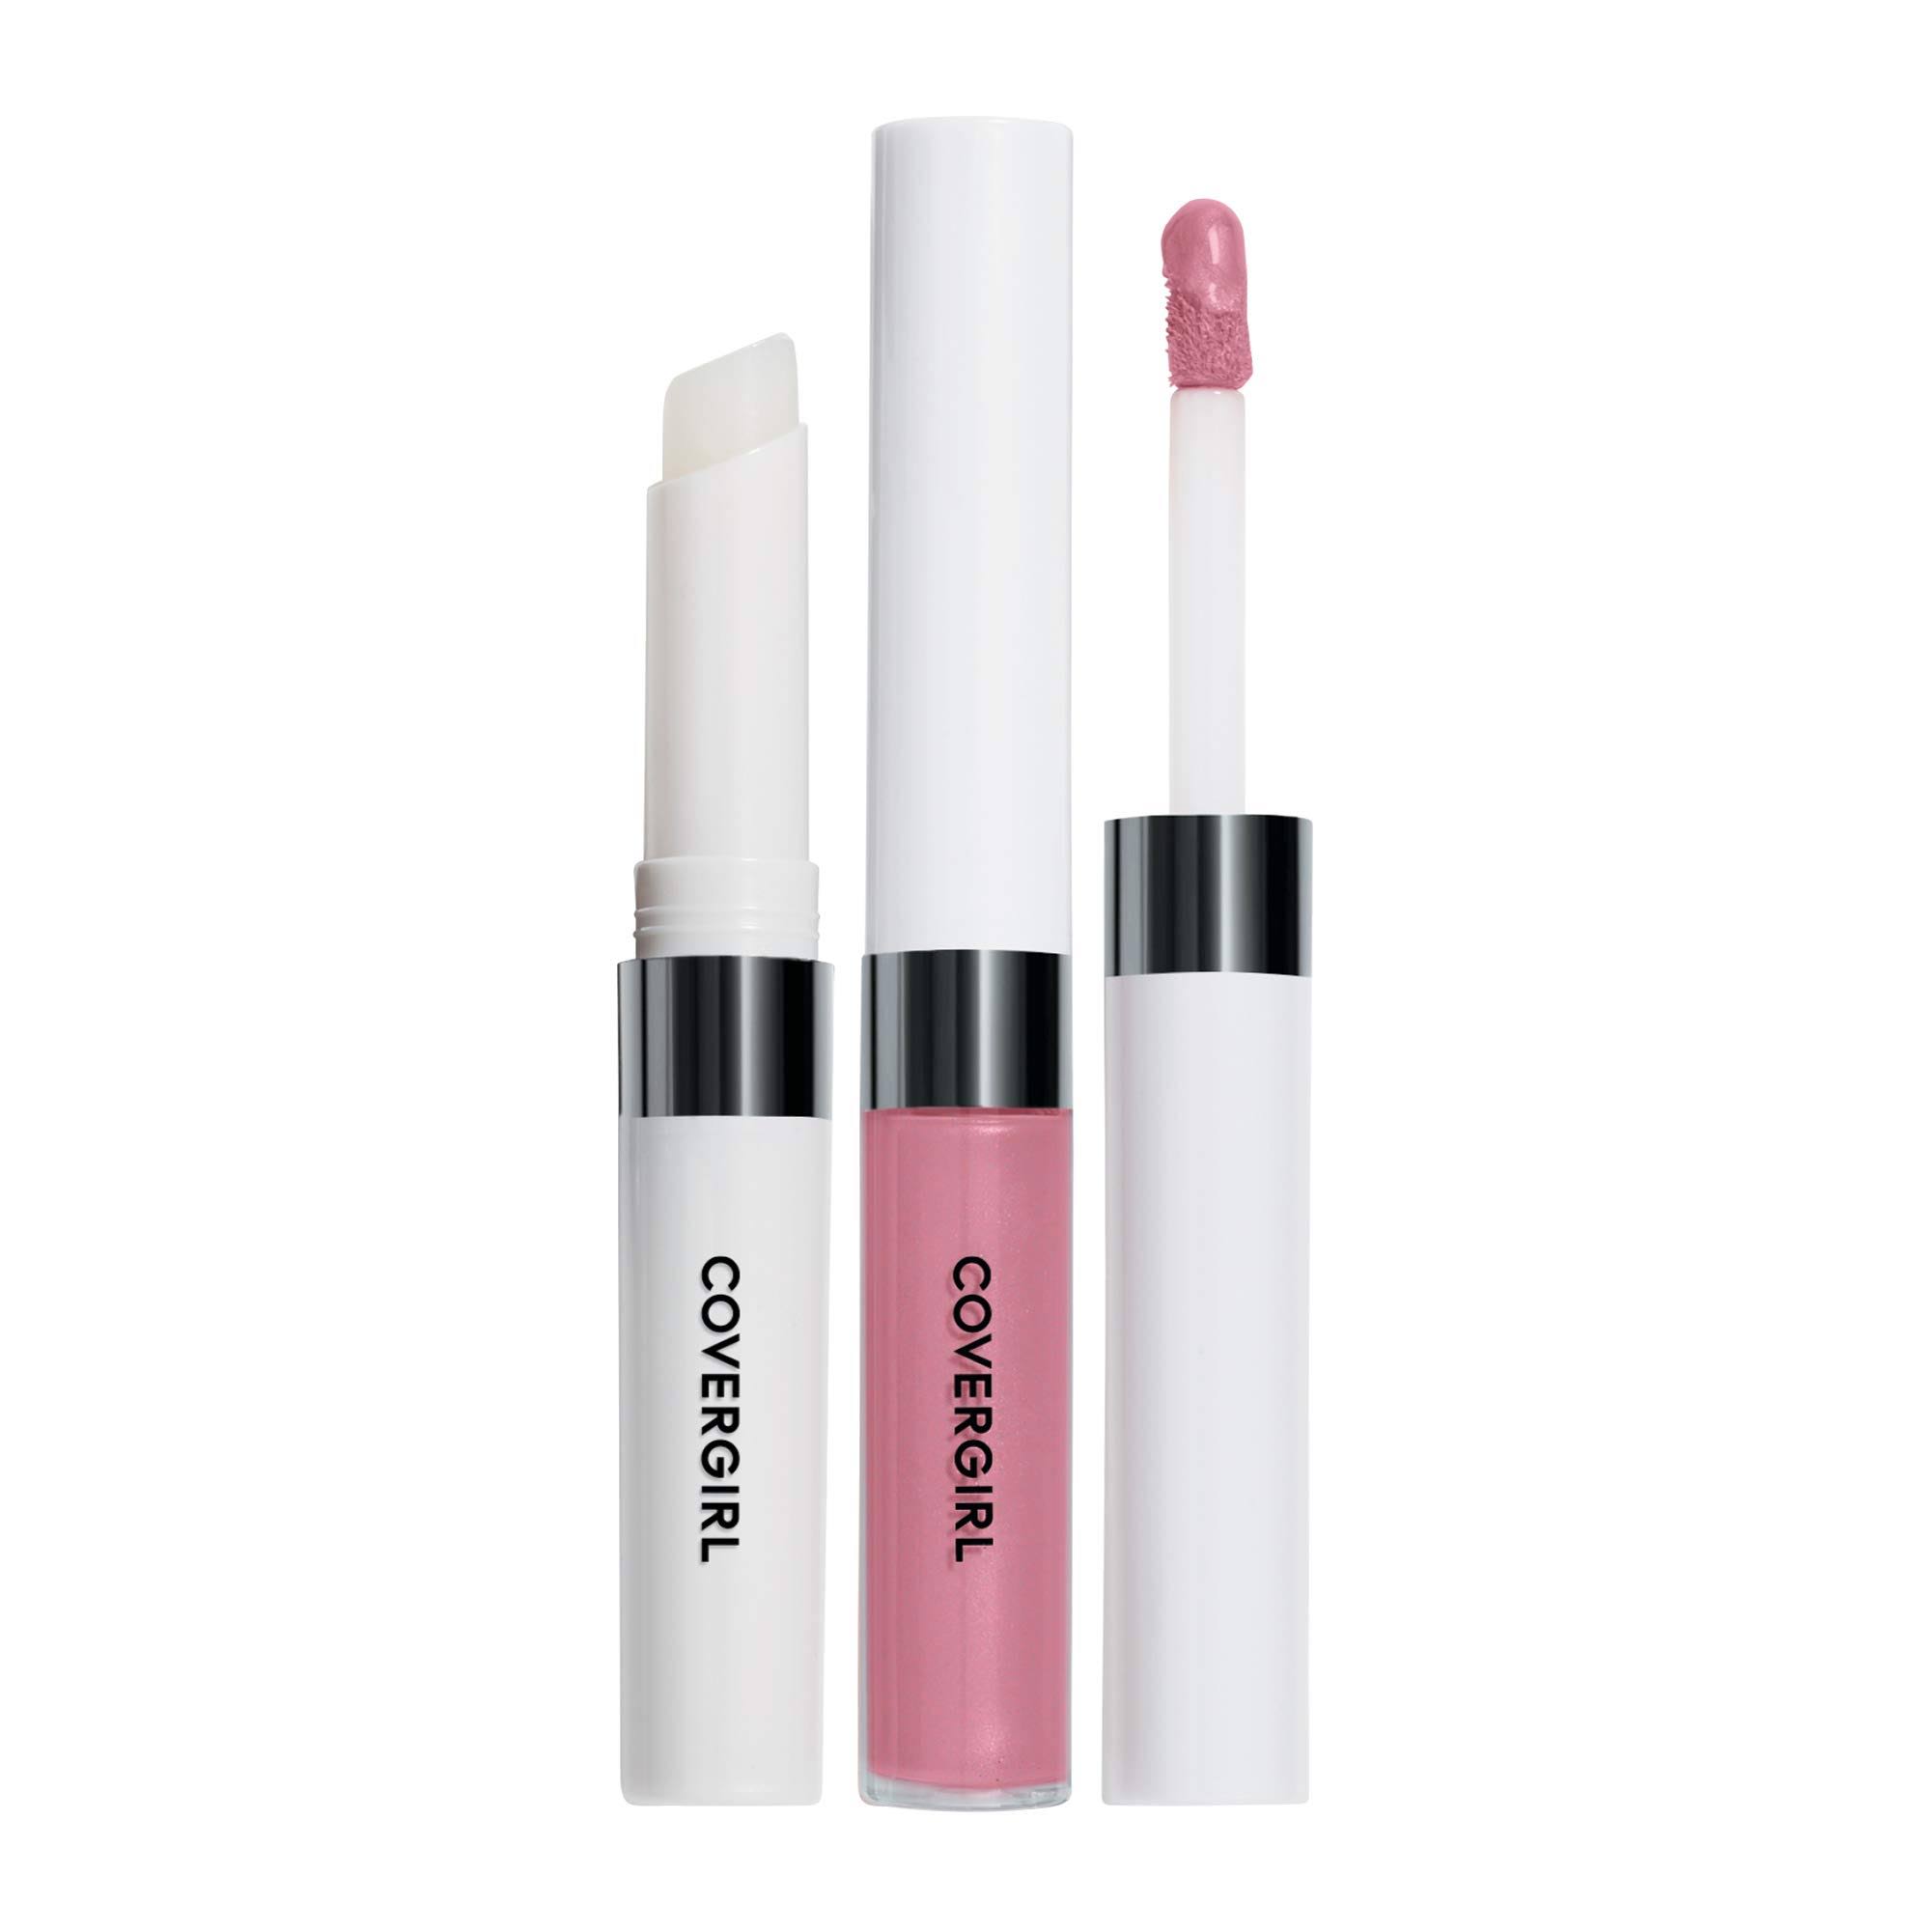 Covergirl Outlast All Day Moisturizing Lip Color - Blushed Mauve 550